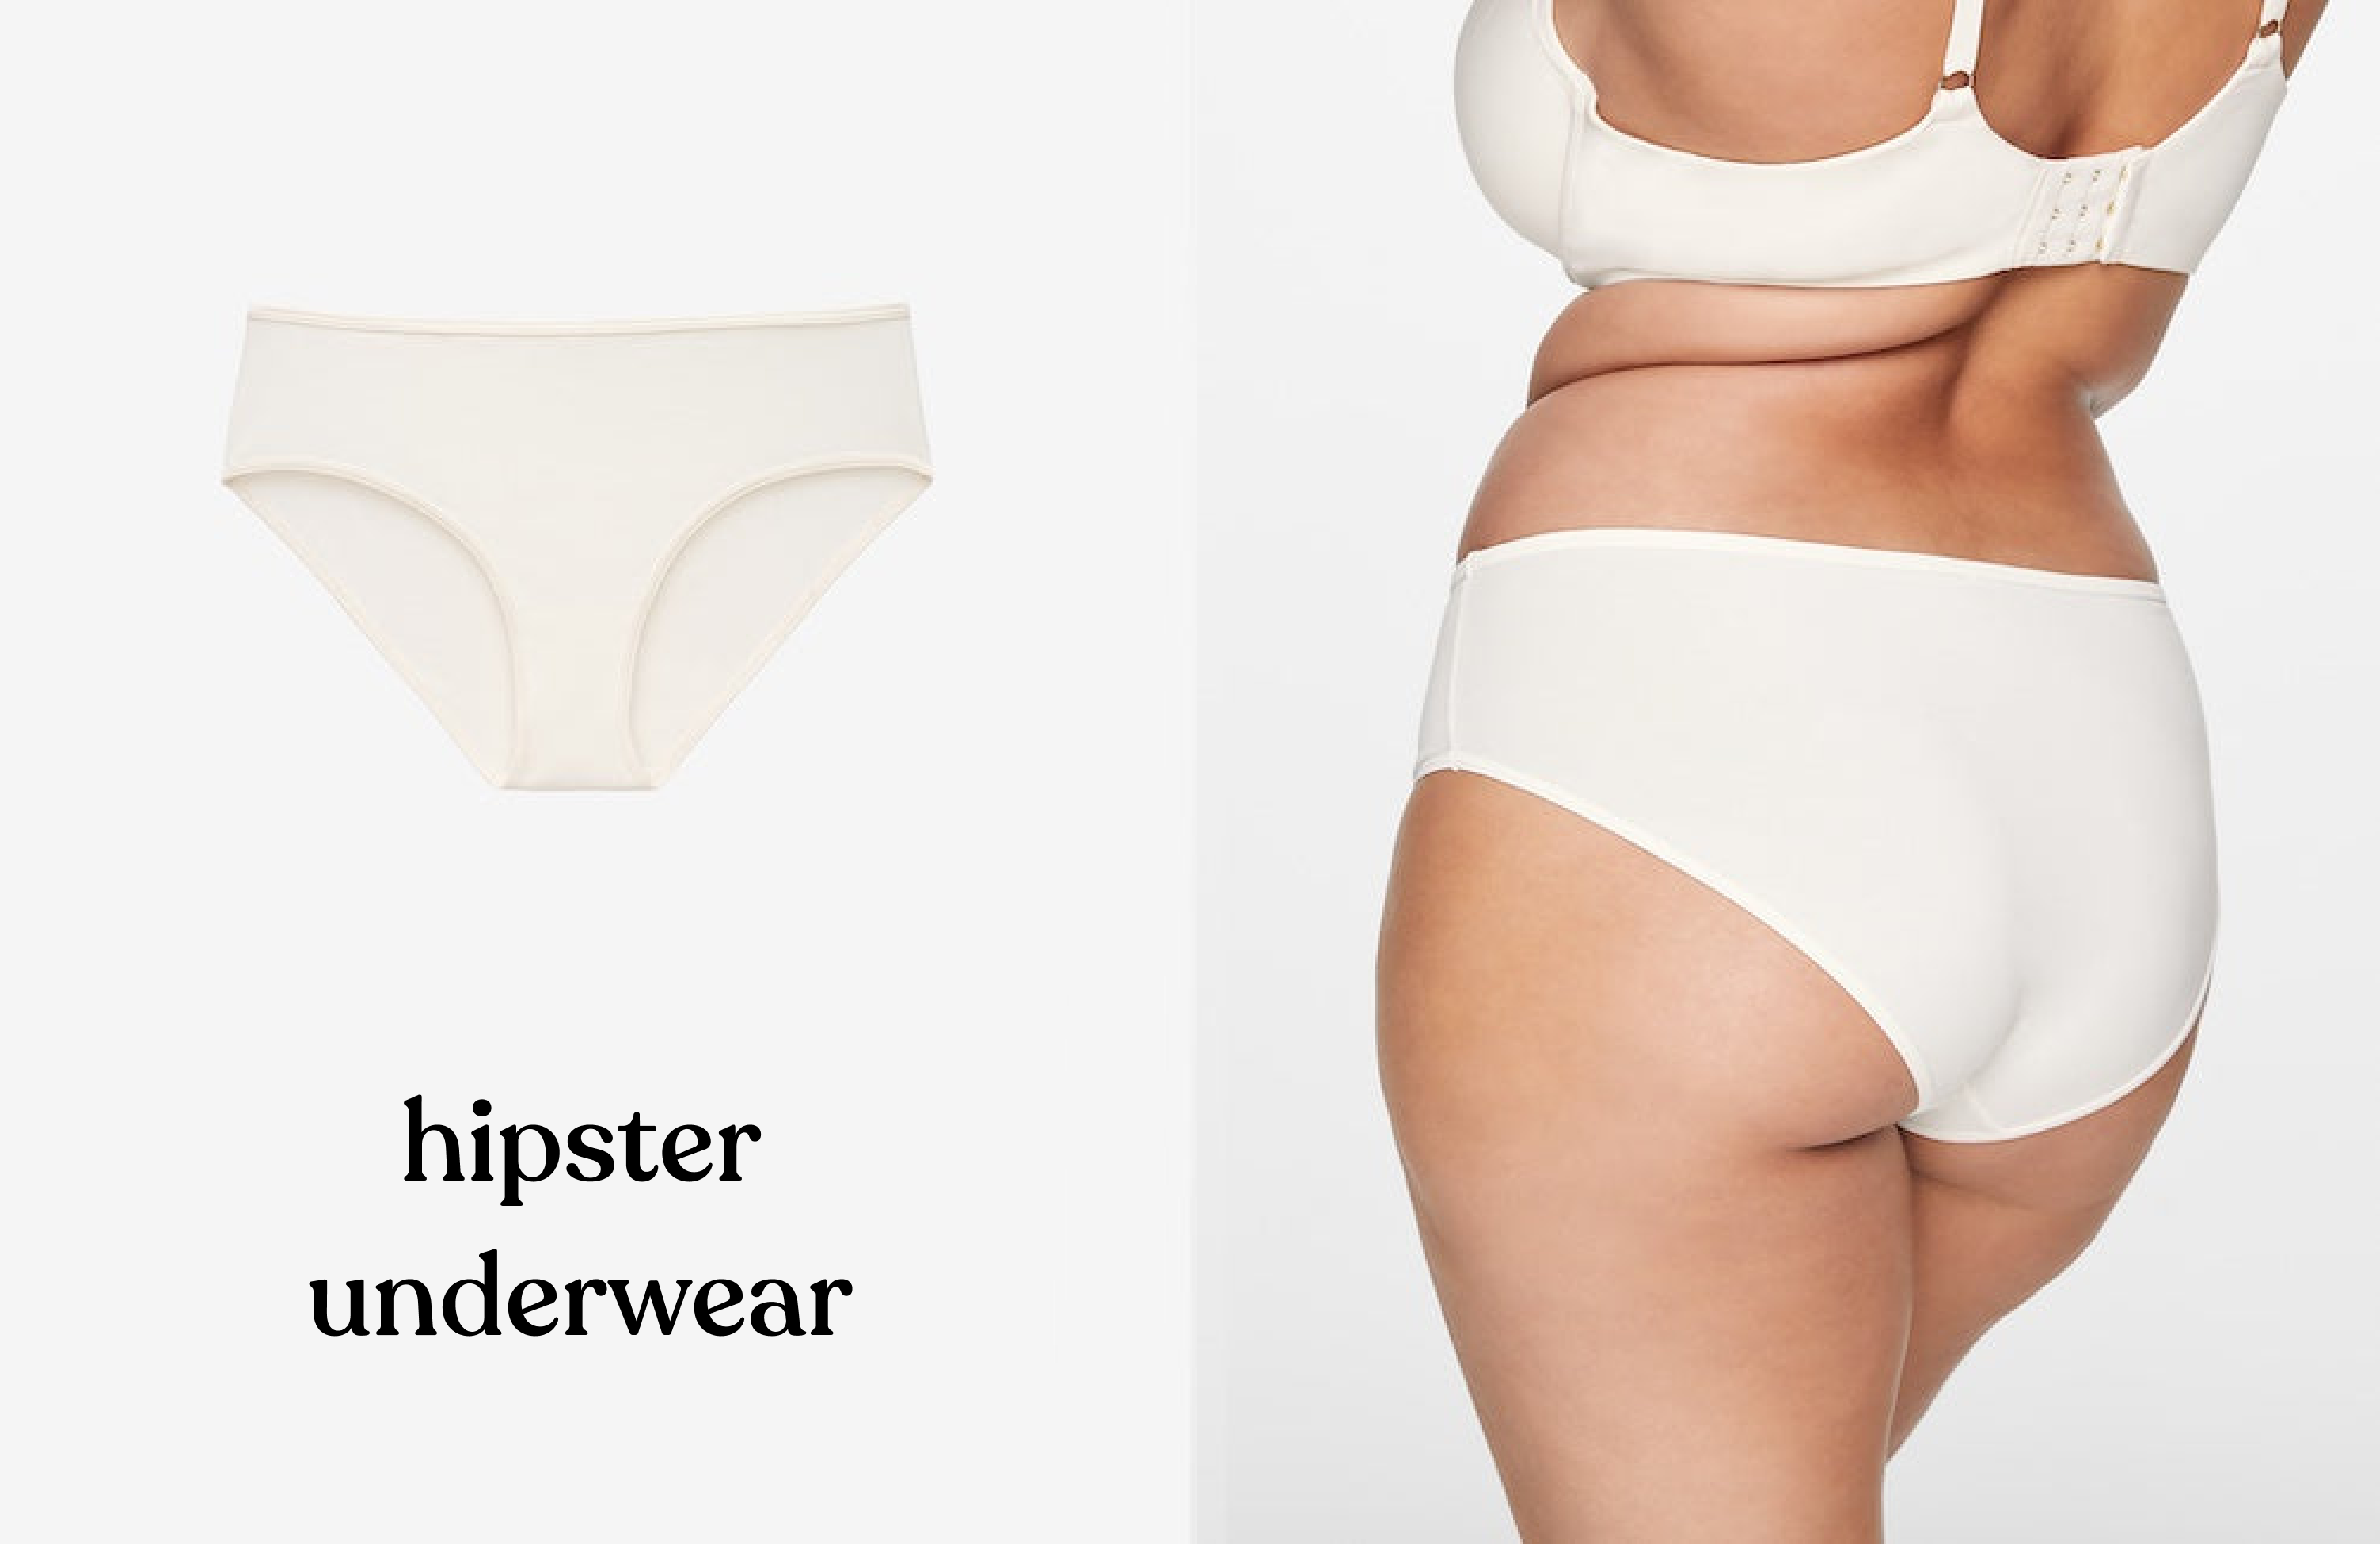 What is The Difference Between the Hipster and Bikini Panties? – Prag & Co